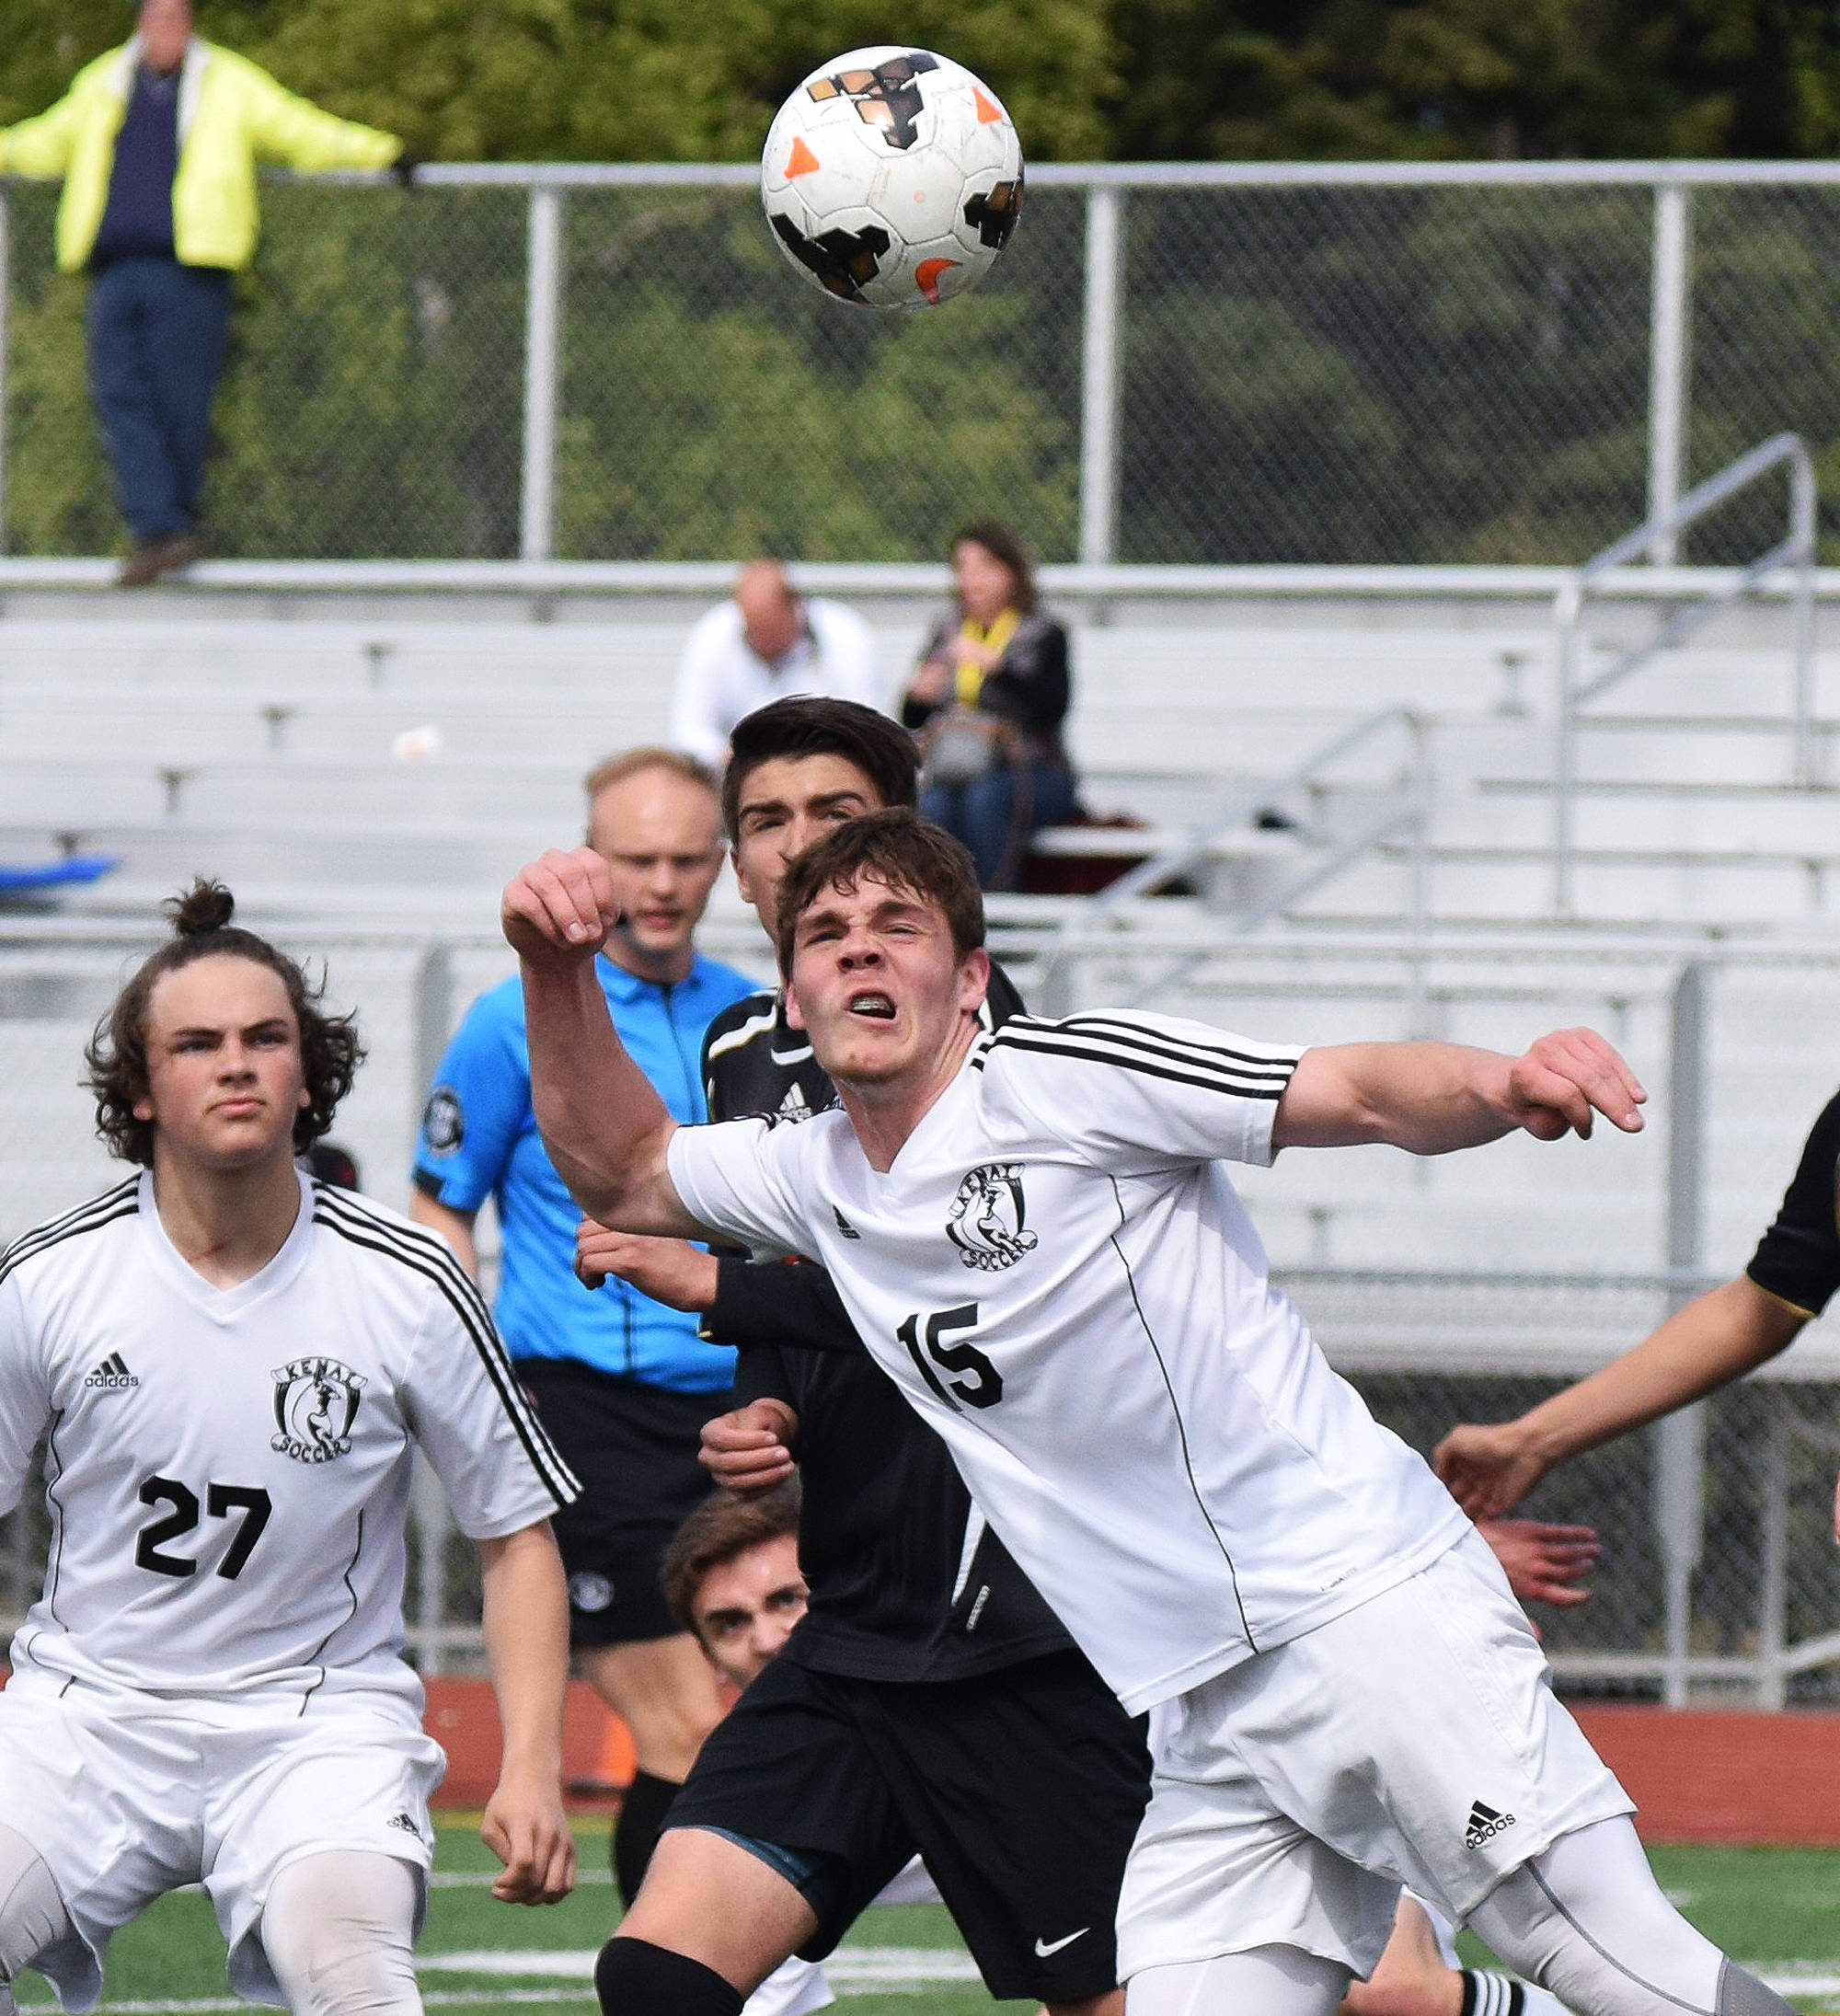 Kenai’s Titus Riddall (15) puts a head on the ball in the Division II state soccer championship final against Juneau-Douglas Saturday afternoon at Service High School. (Photo by Joey Klecka/Peninsula Clarion)